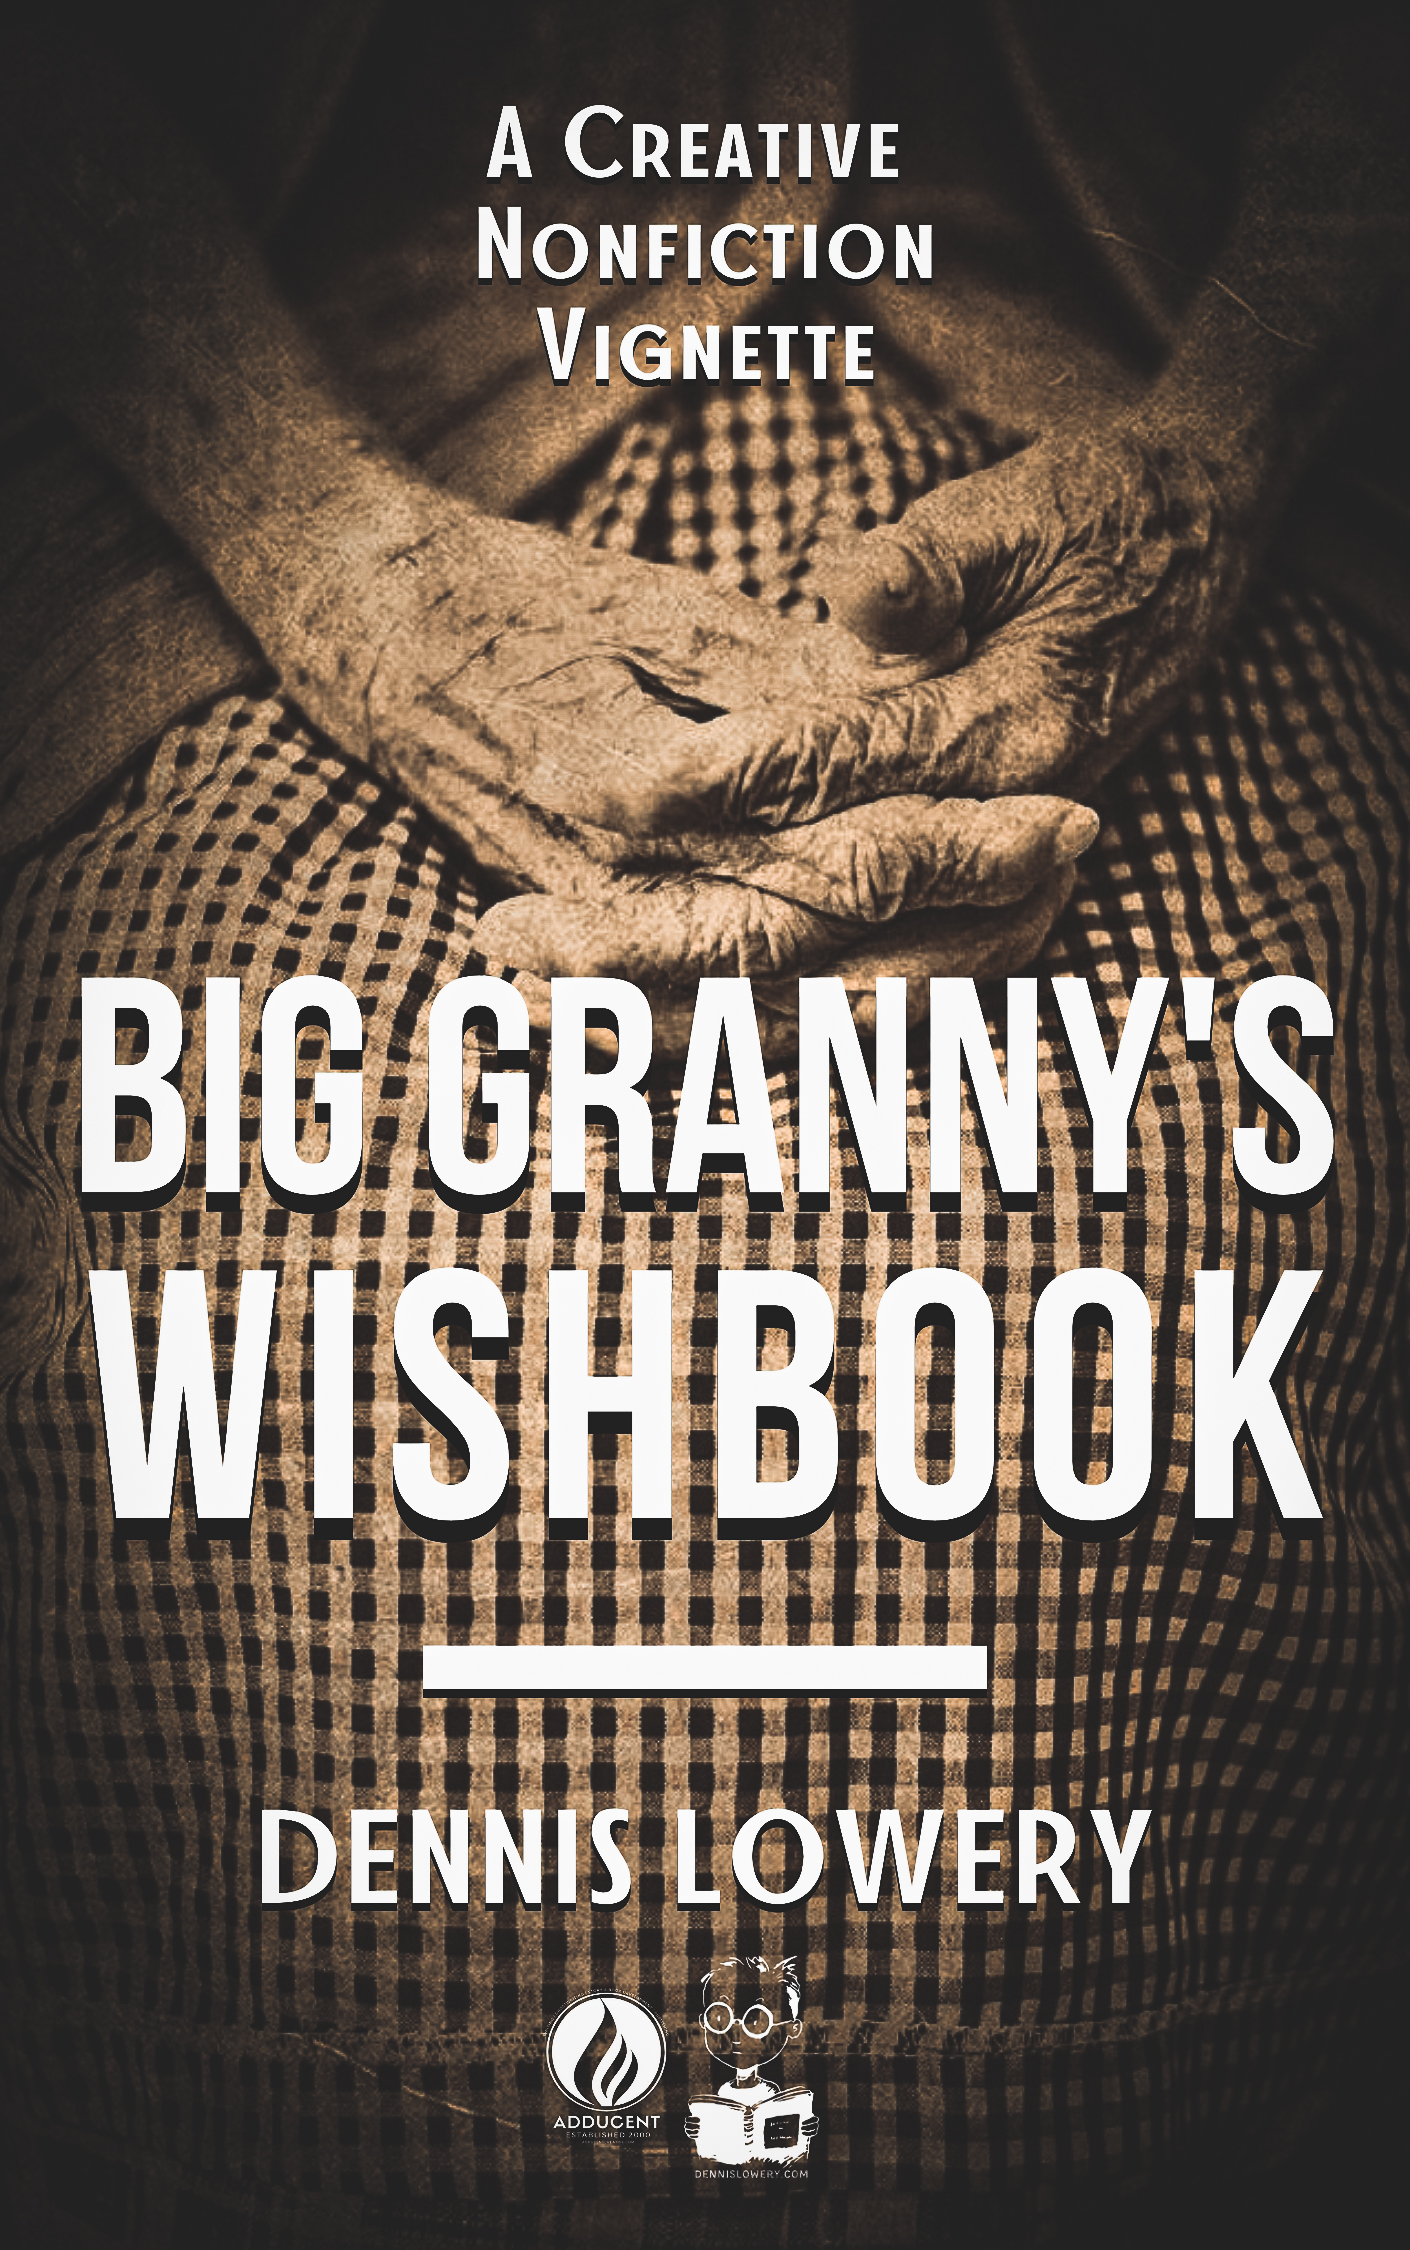 Big Granny's WISHBOOK Creative Nonfiction from Dennis Lowery. 